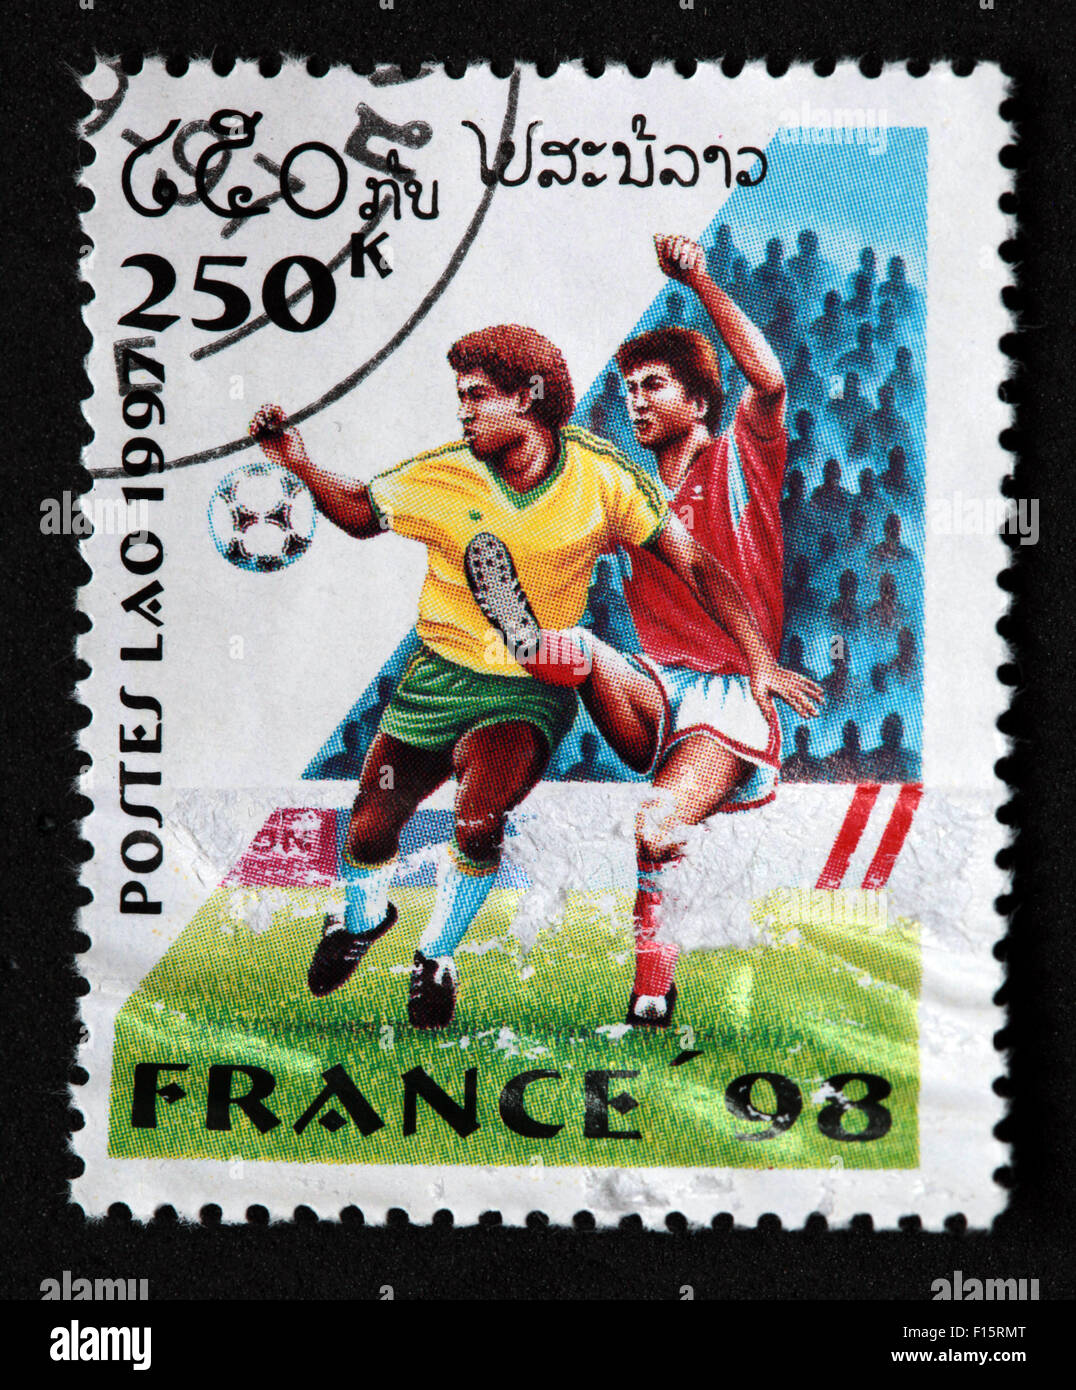 Postes Lao Laos 250K France 1998 98 football deportes world Cup worldcup sport Stamp Stock Photo